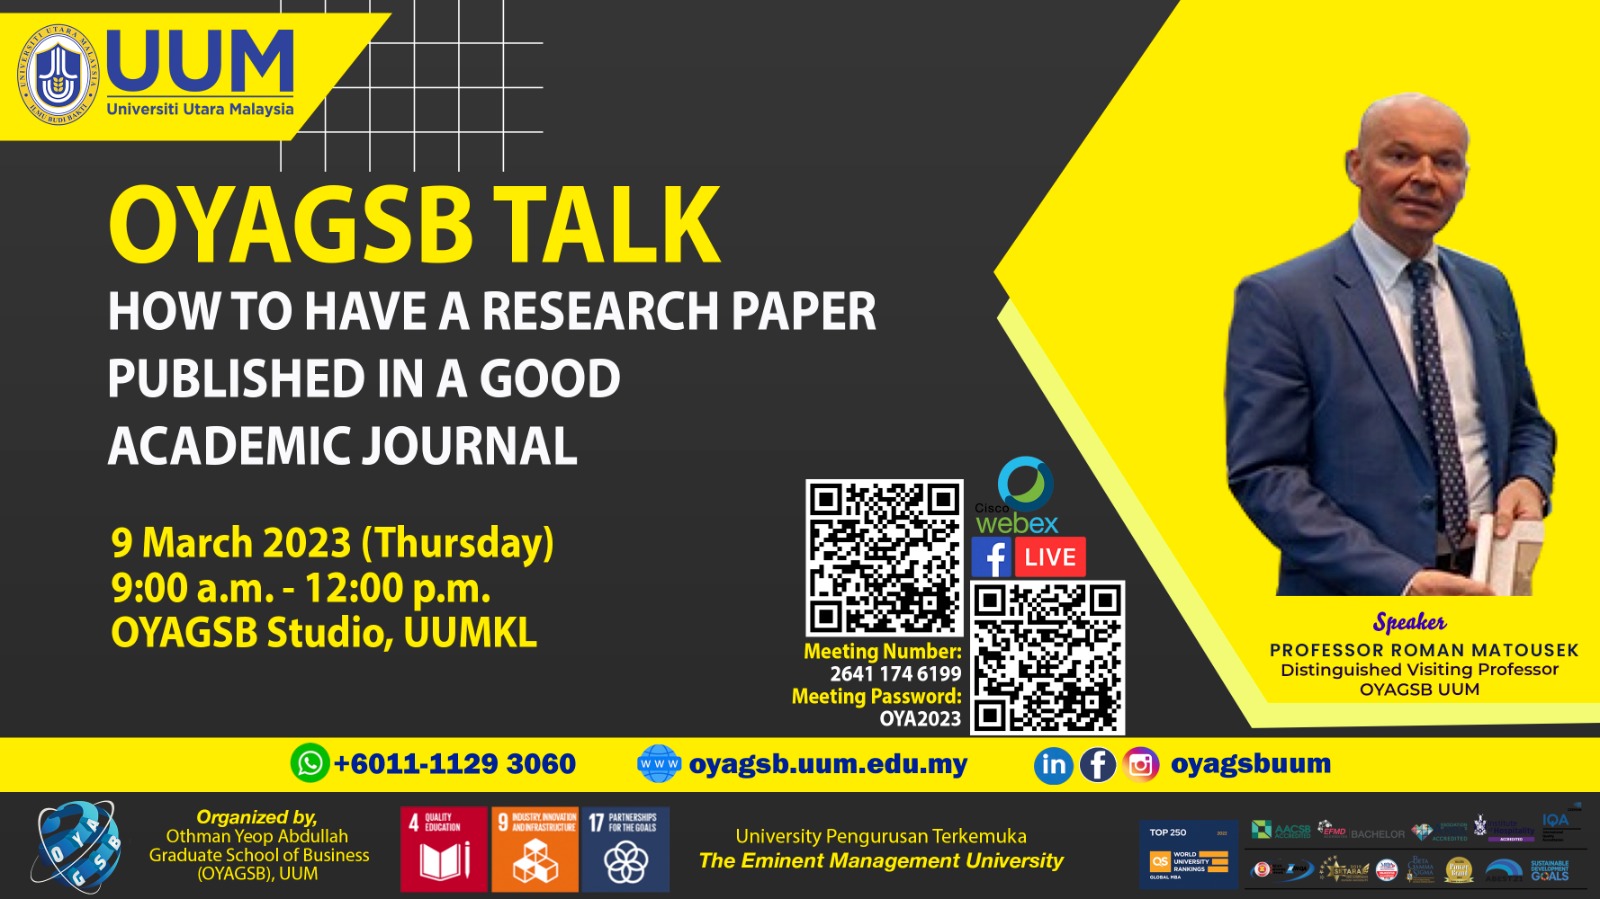 OYAGSB Talk: How to Have a Research Paper Published in a Good Academic Journal